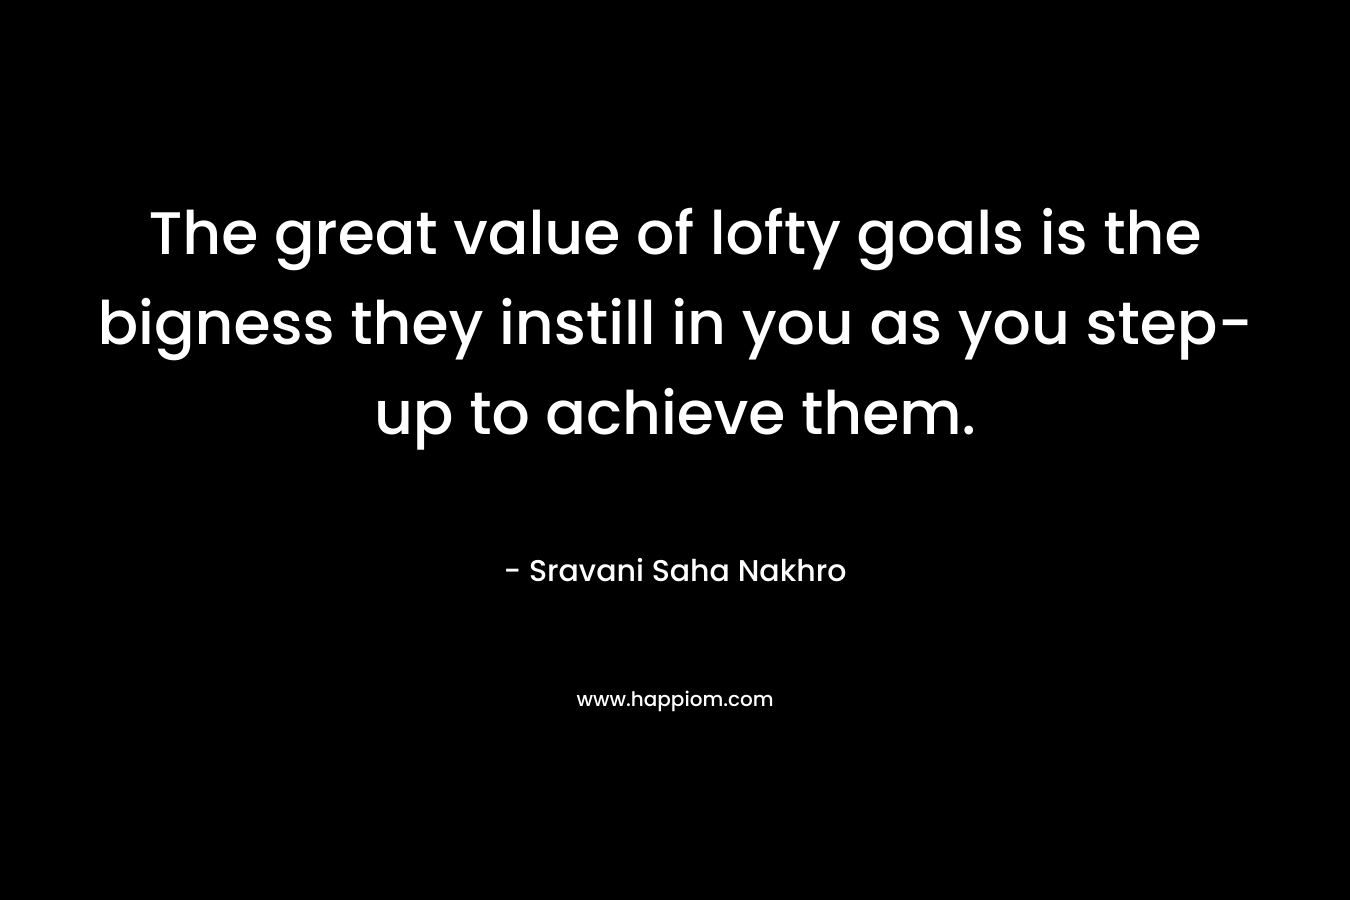 The great value of lofty goals is the bigness they instill in you as you step-up to achieve them. – Sravani Saha Nakhro